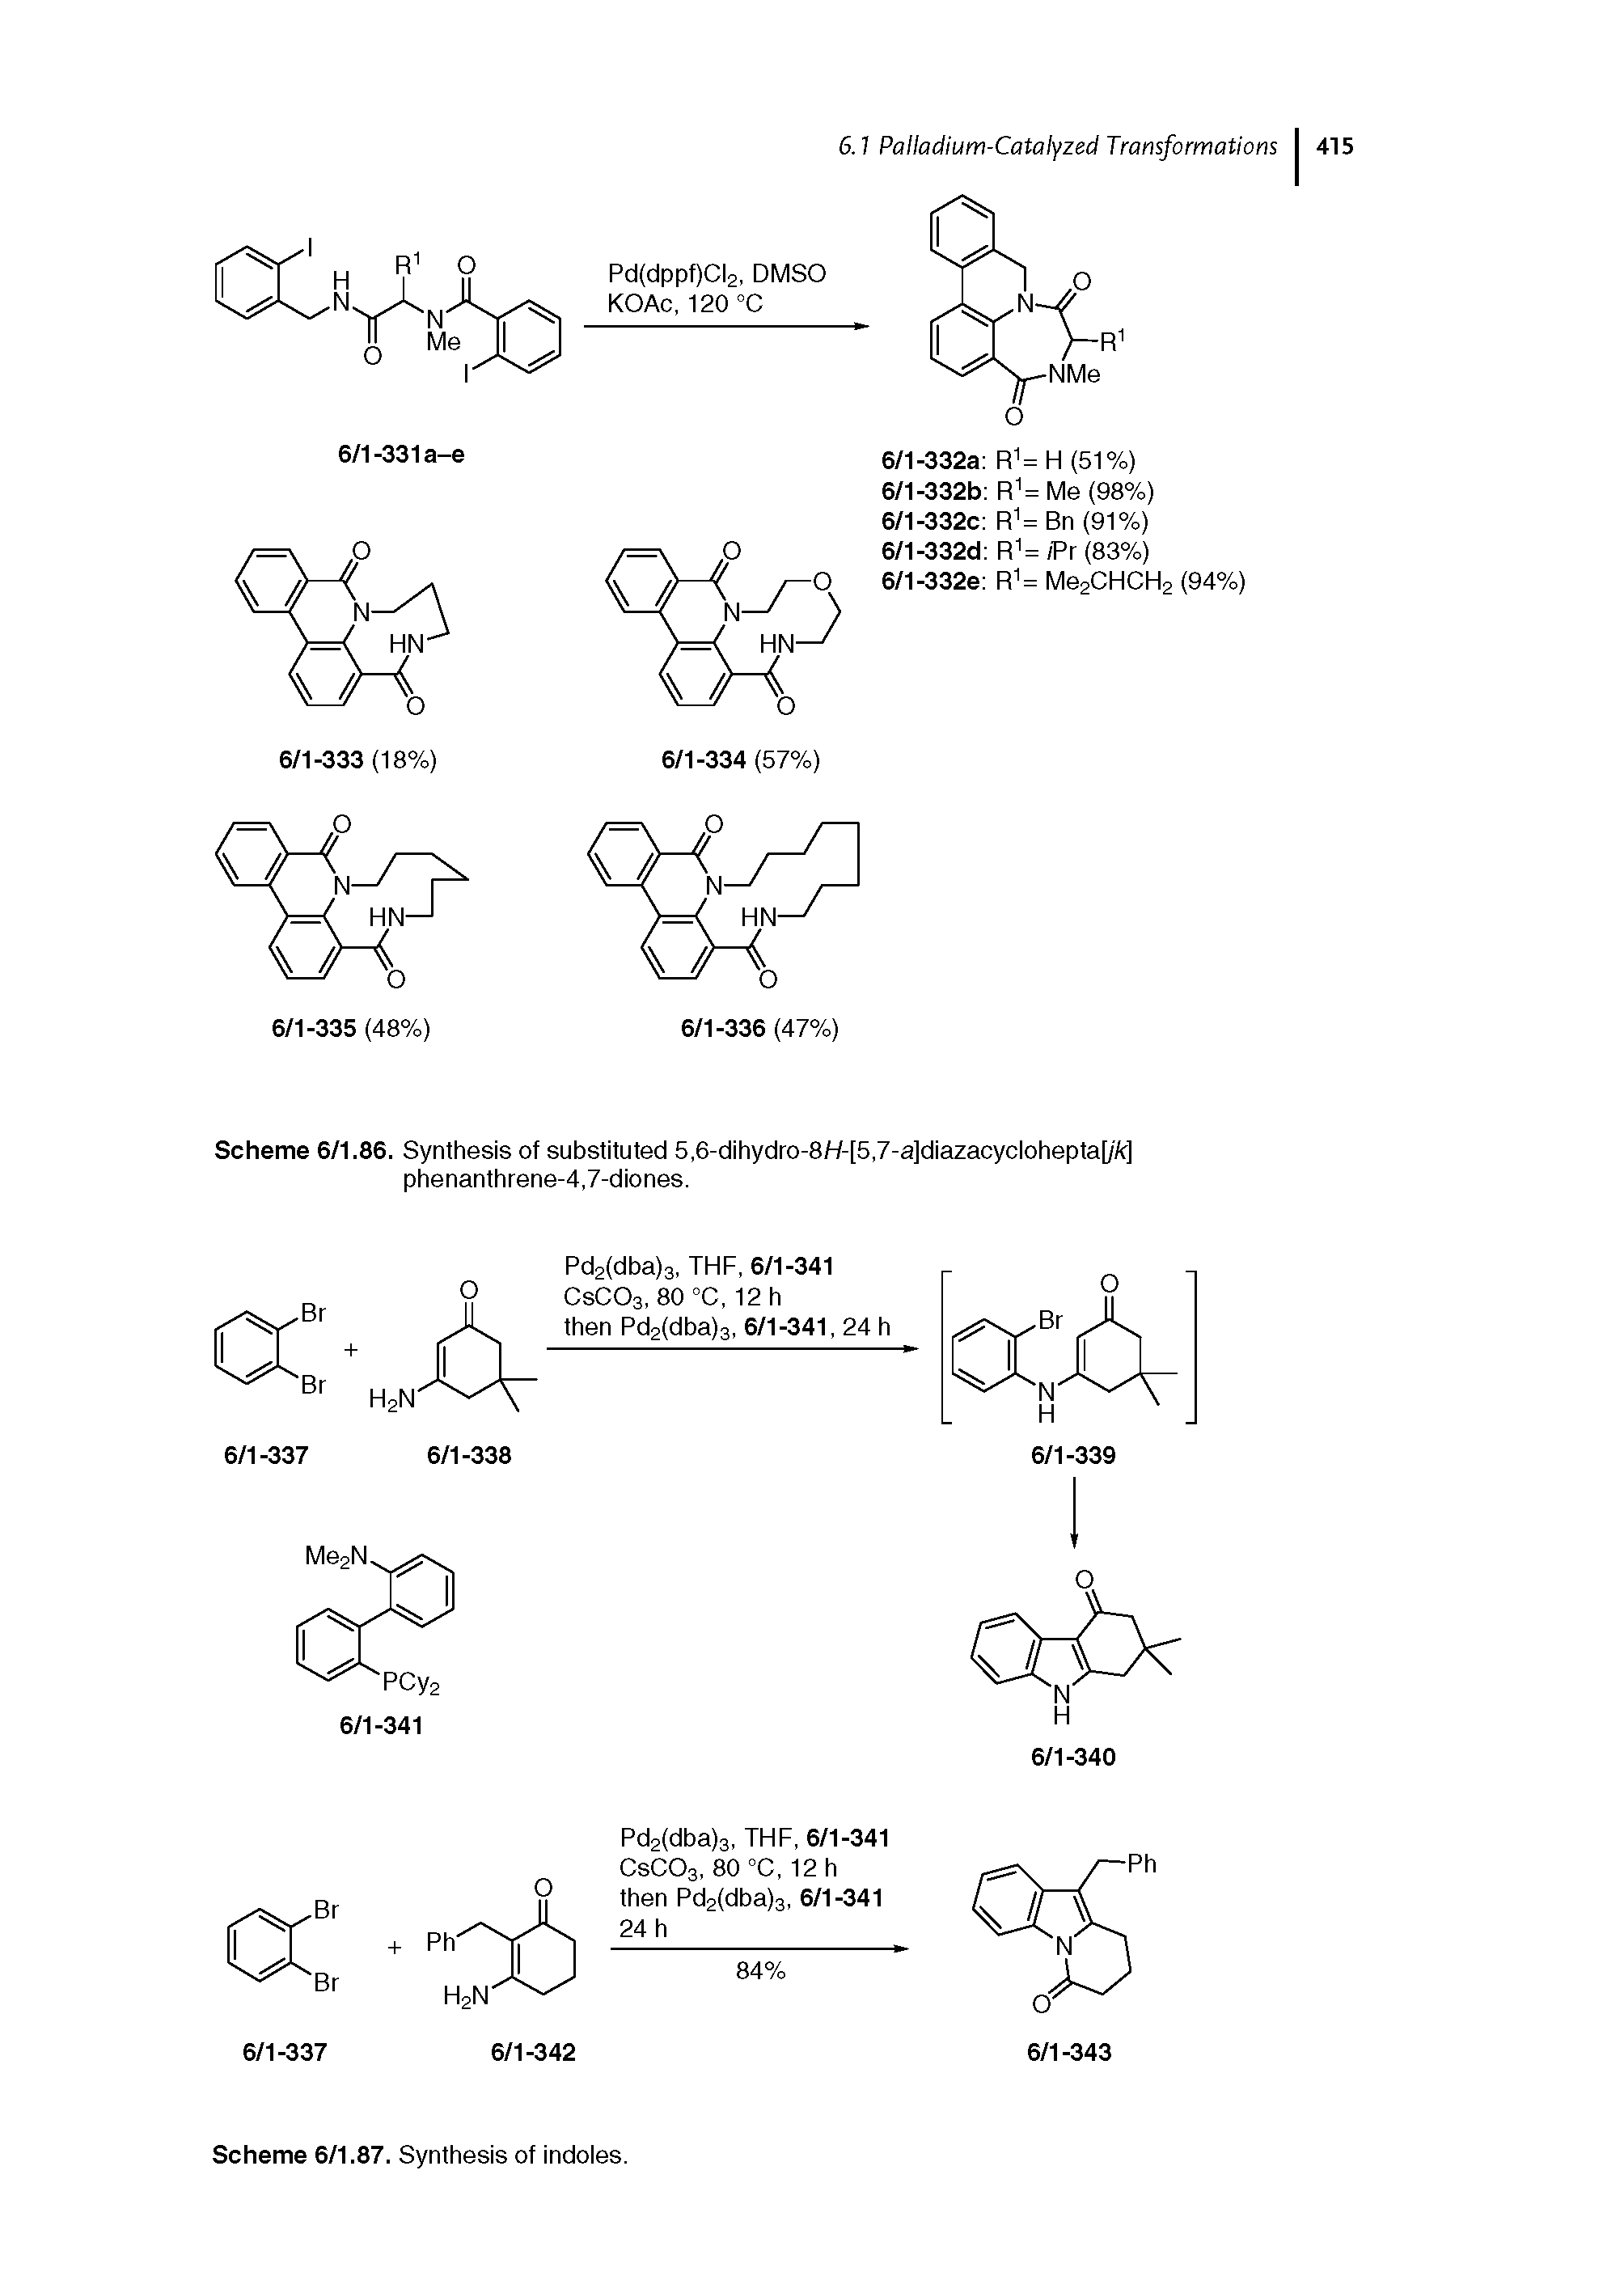 Scheme 6/1.86. Synthesis of substituted 5,6-dihydro-8/-/-[5,7-a]diazacyclohepta[/7c] phenanthrene-4,7-diones.